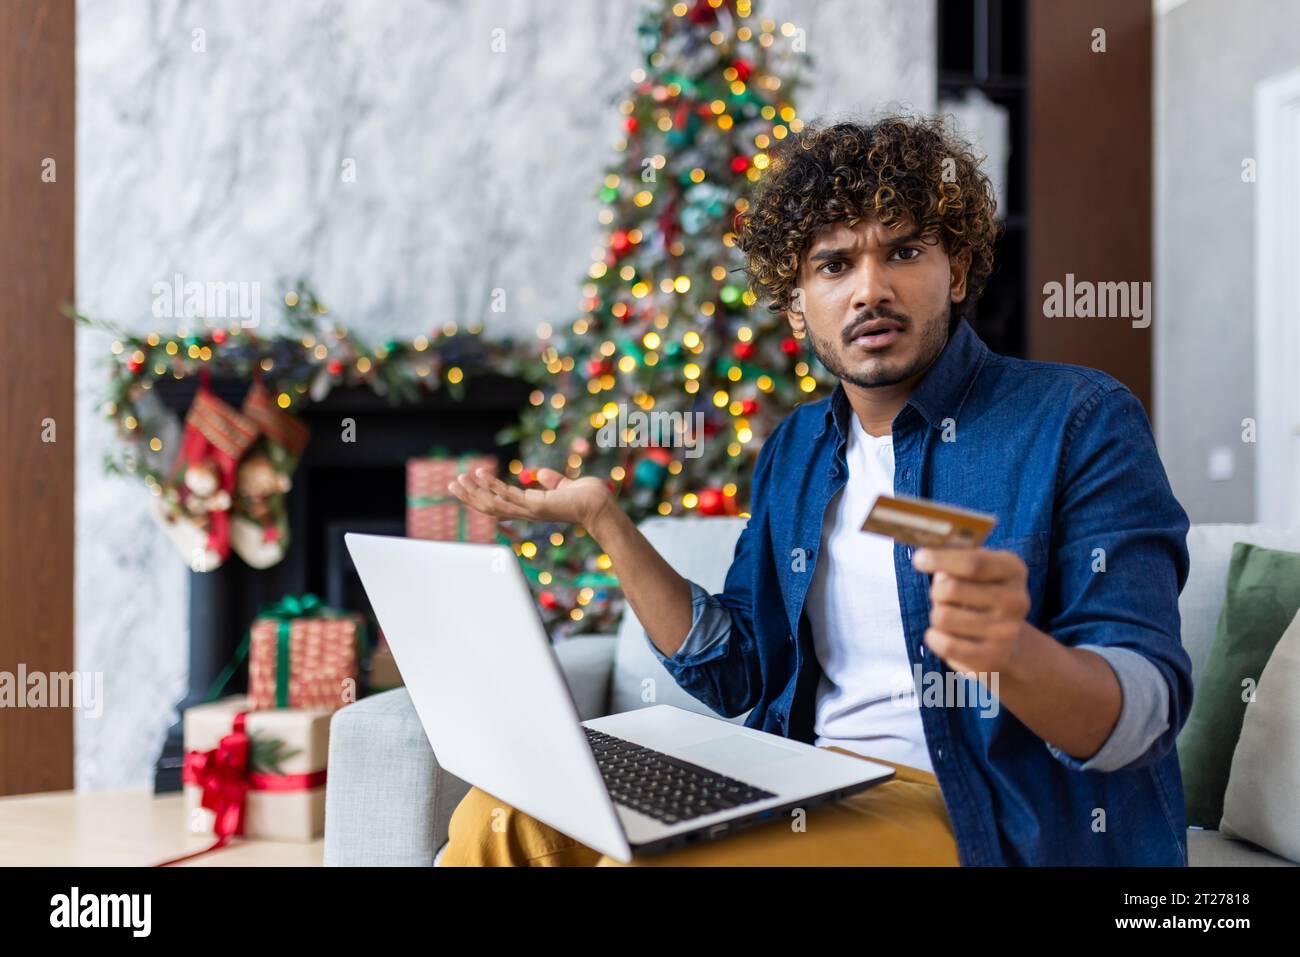 Portrait of cheated unsatisfied man at home on New Year and Christmas holidays, hispanic man looking at camera with laptop rejected money transfer, using bank credit card. Stock Photo